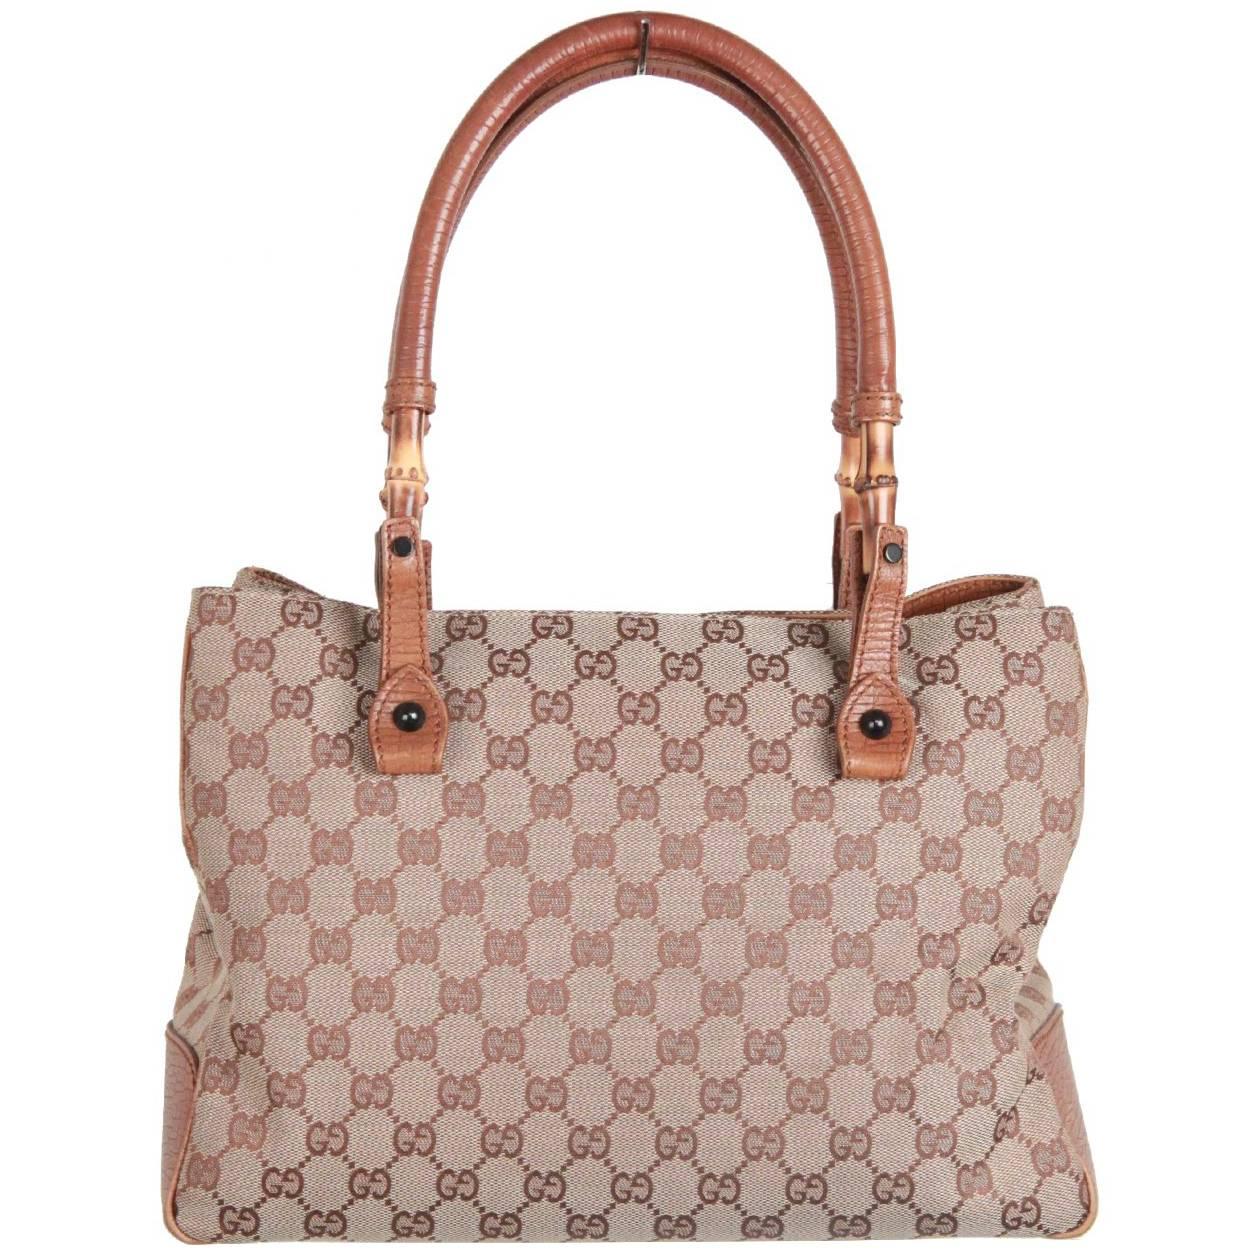 GUCCI Beige Monogram Canvas TOTE Bag w/ BAMBOO Detail